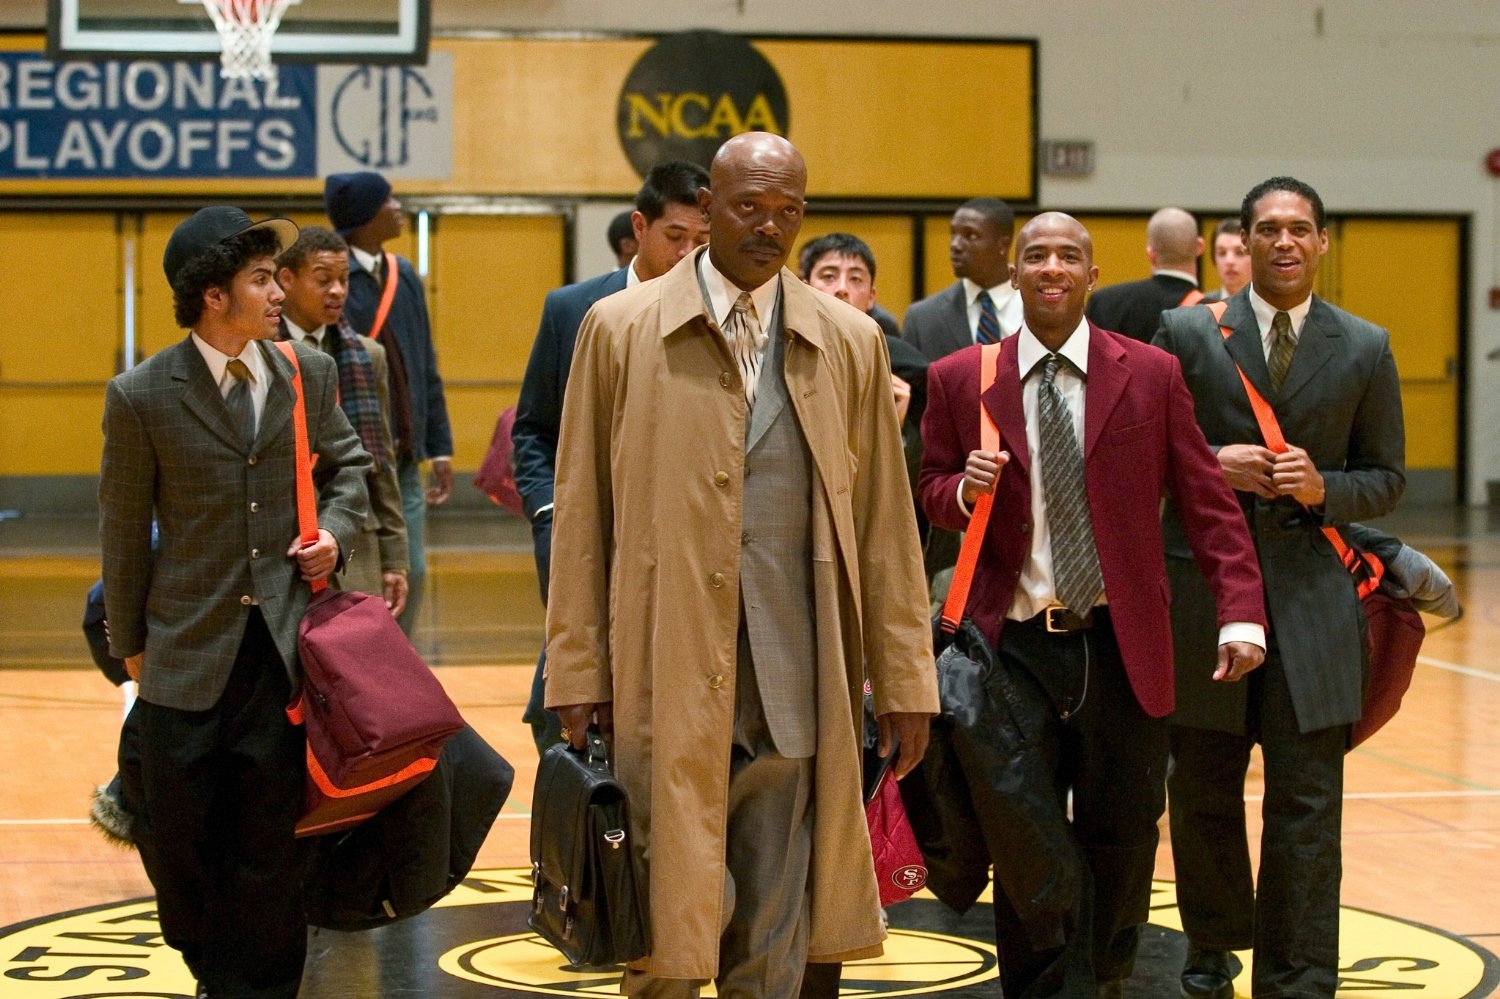 Coach Carter 2005 Watch Online On 123movies